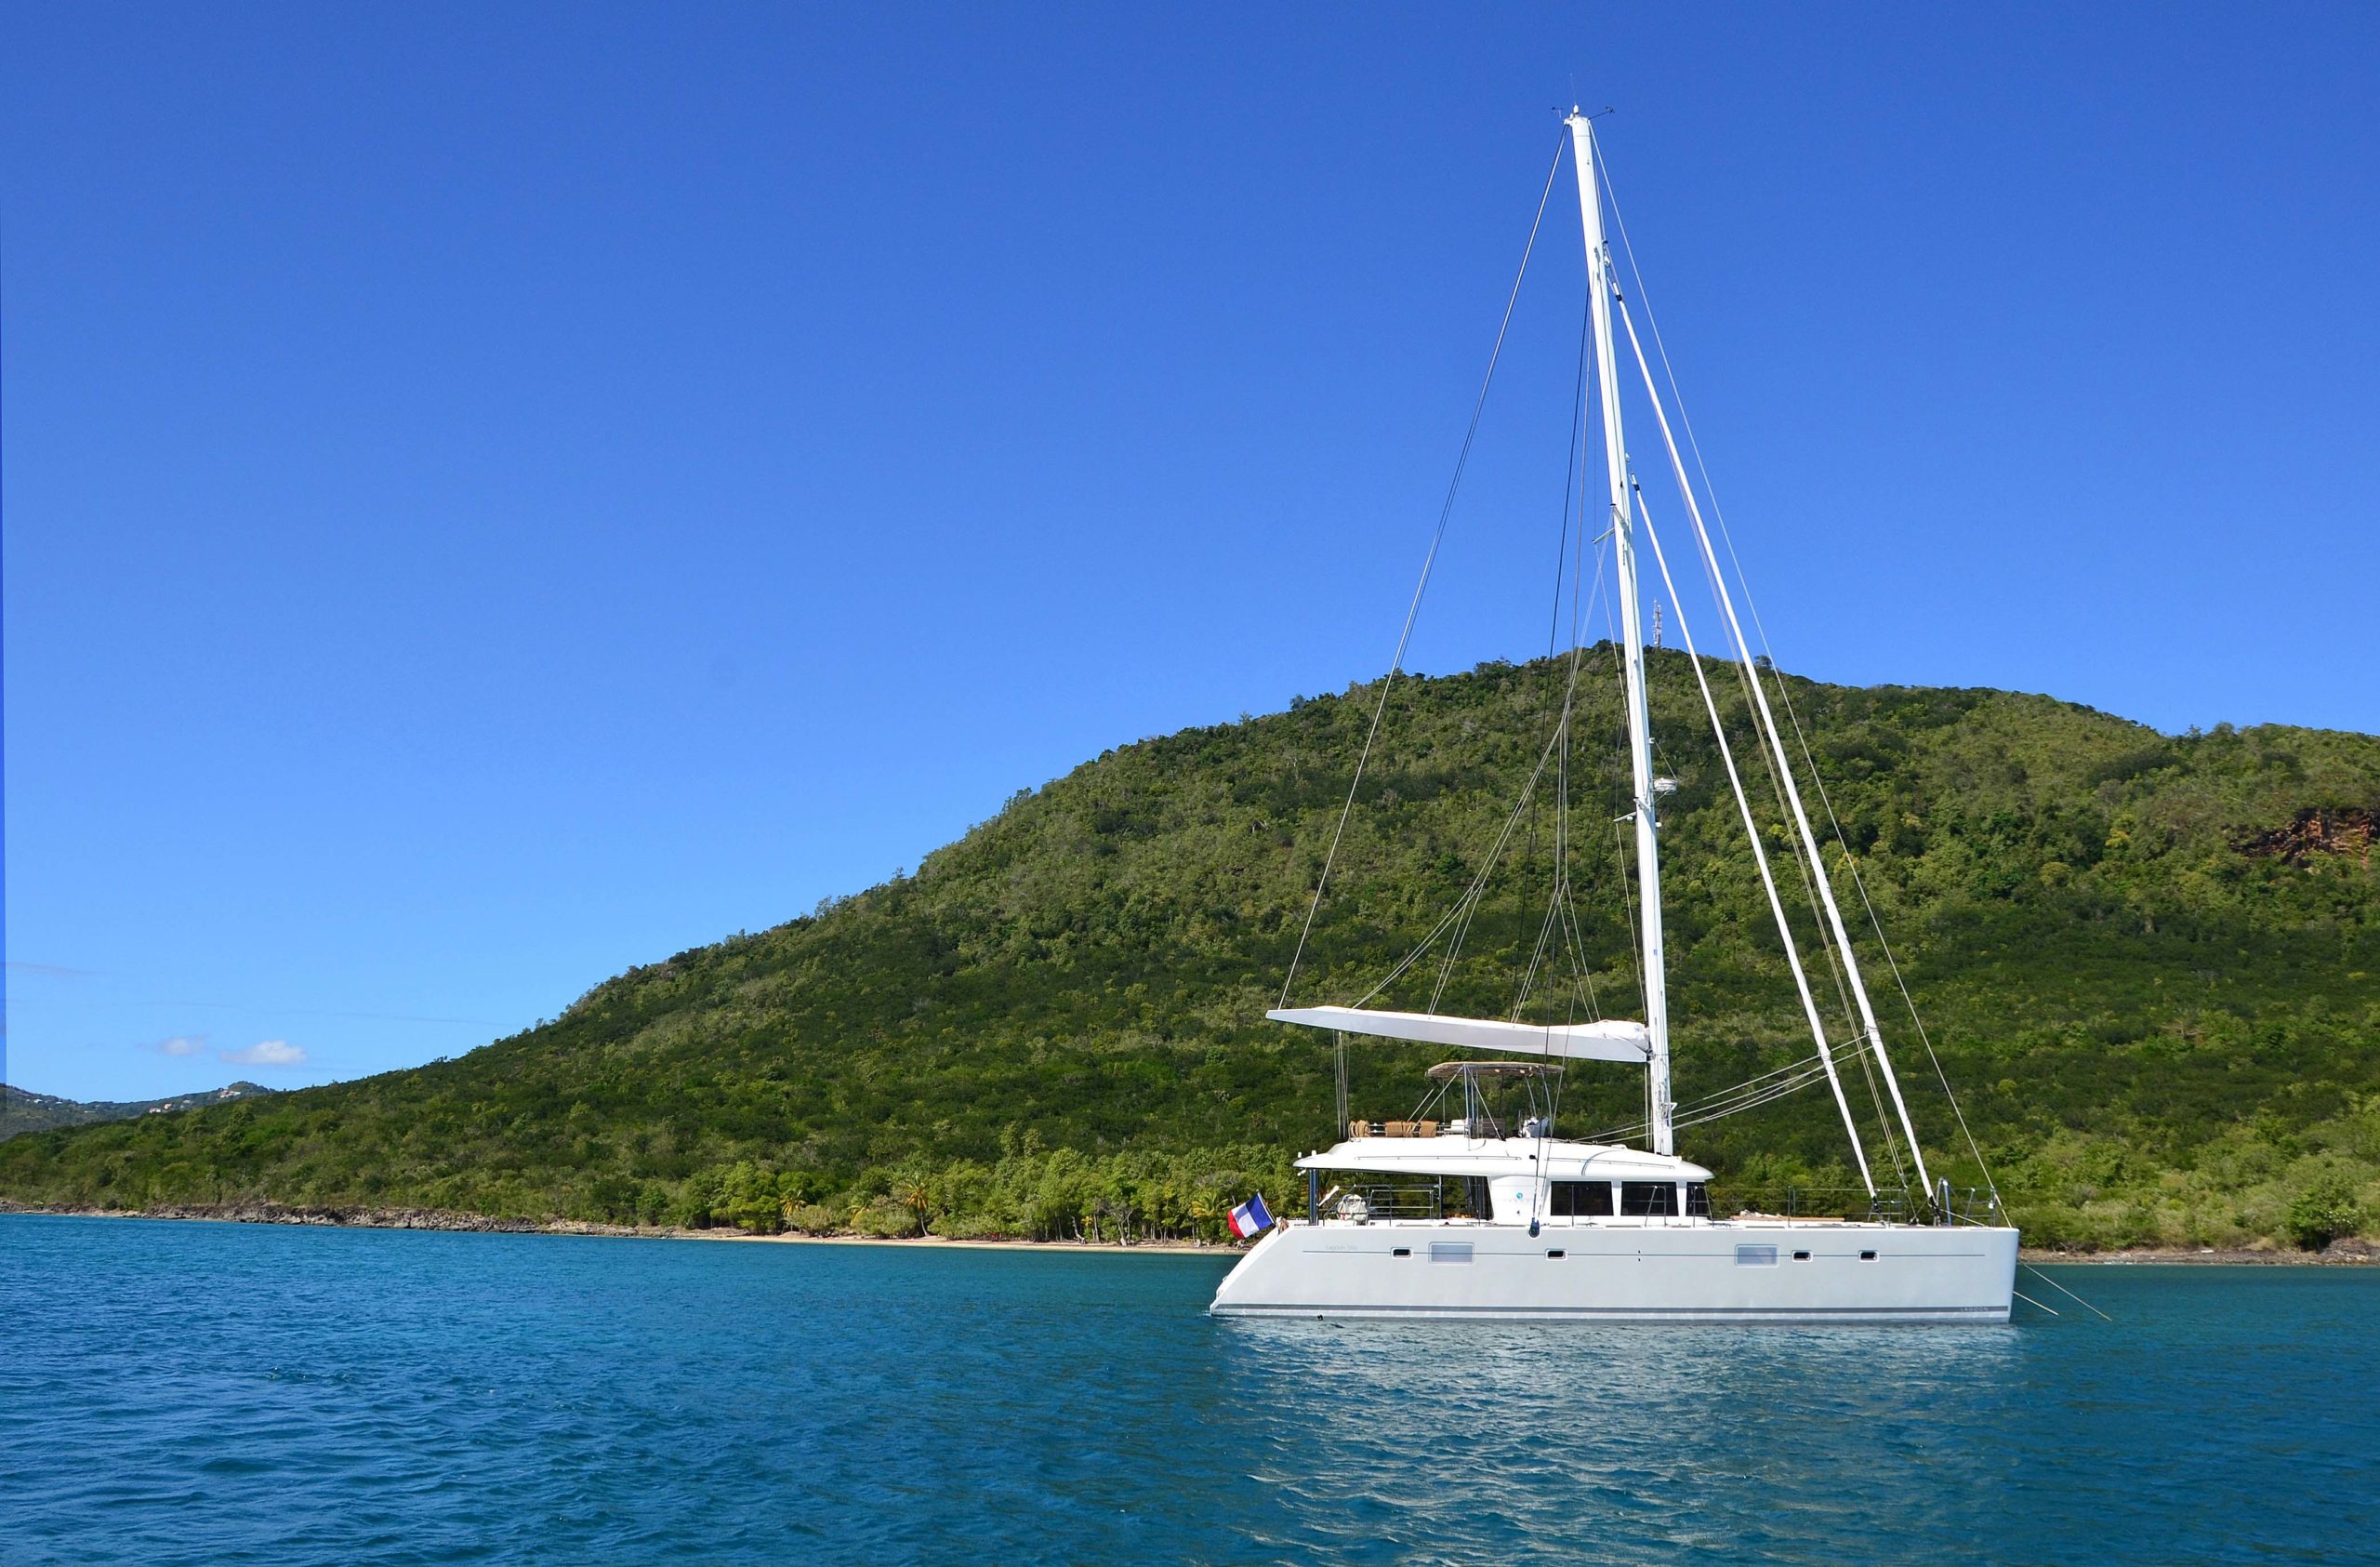 rent a yacht for a week caribbean